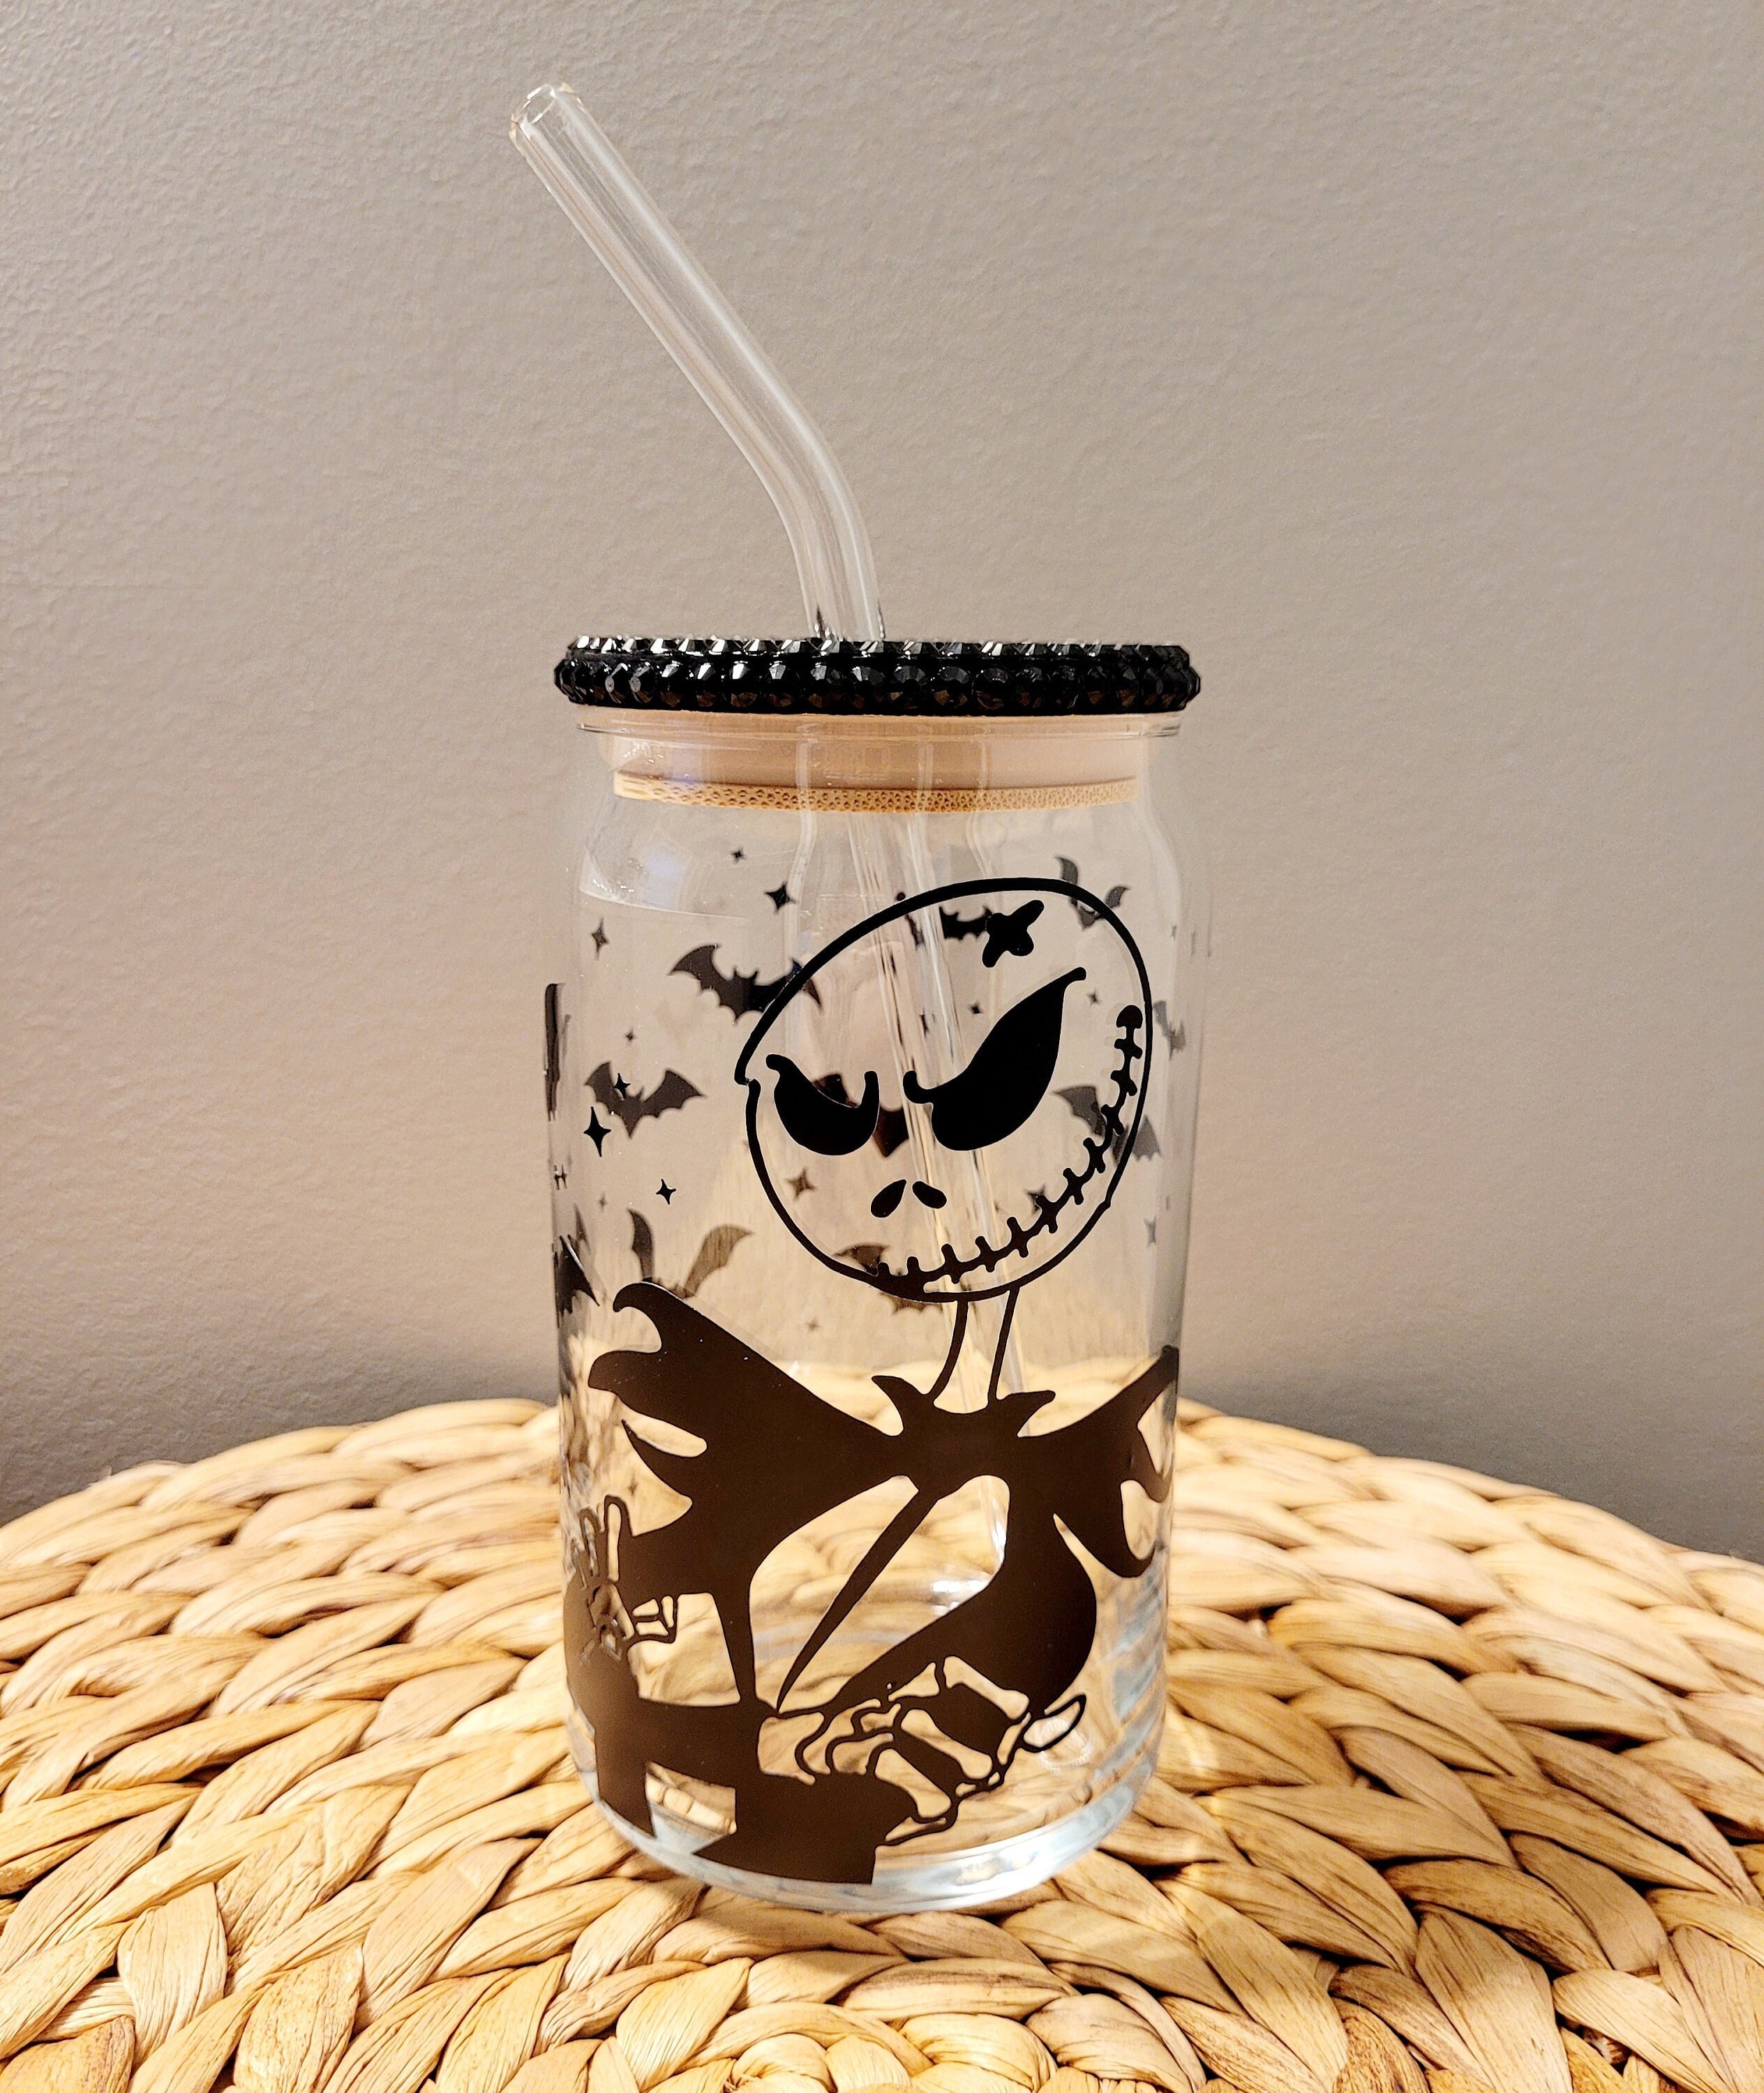 Nightmare before christmas glass can drinking glass bamboo lid and straw